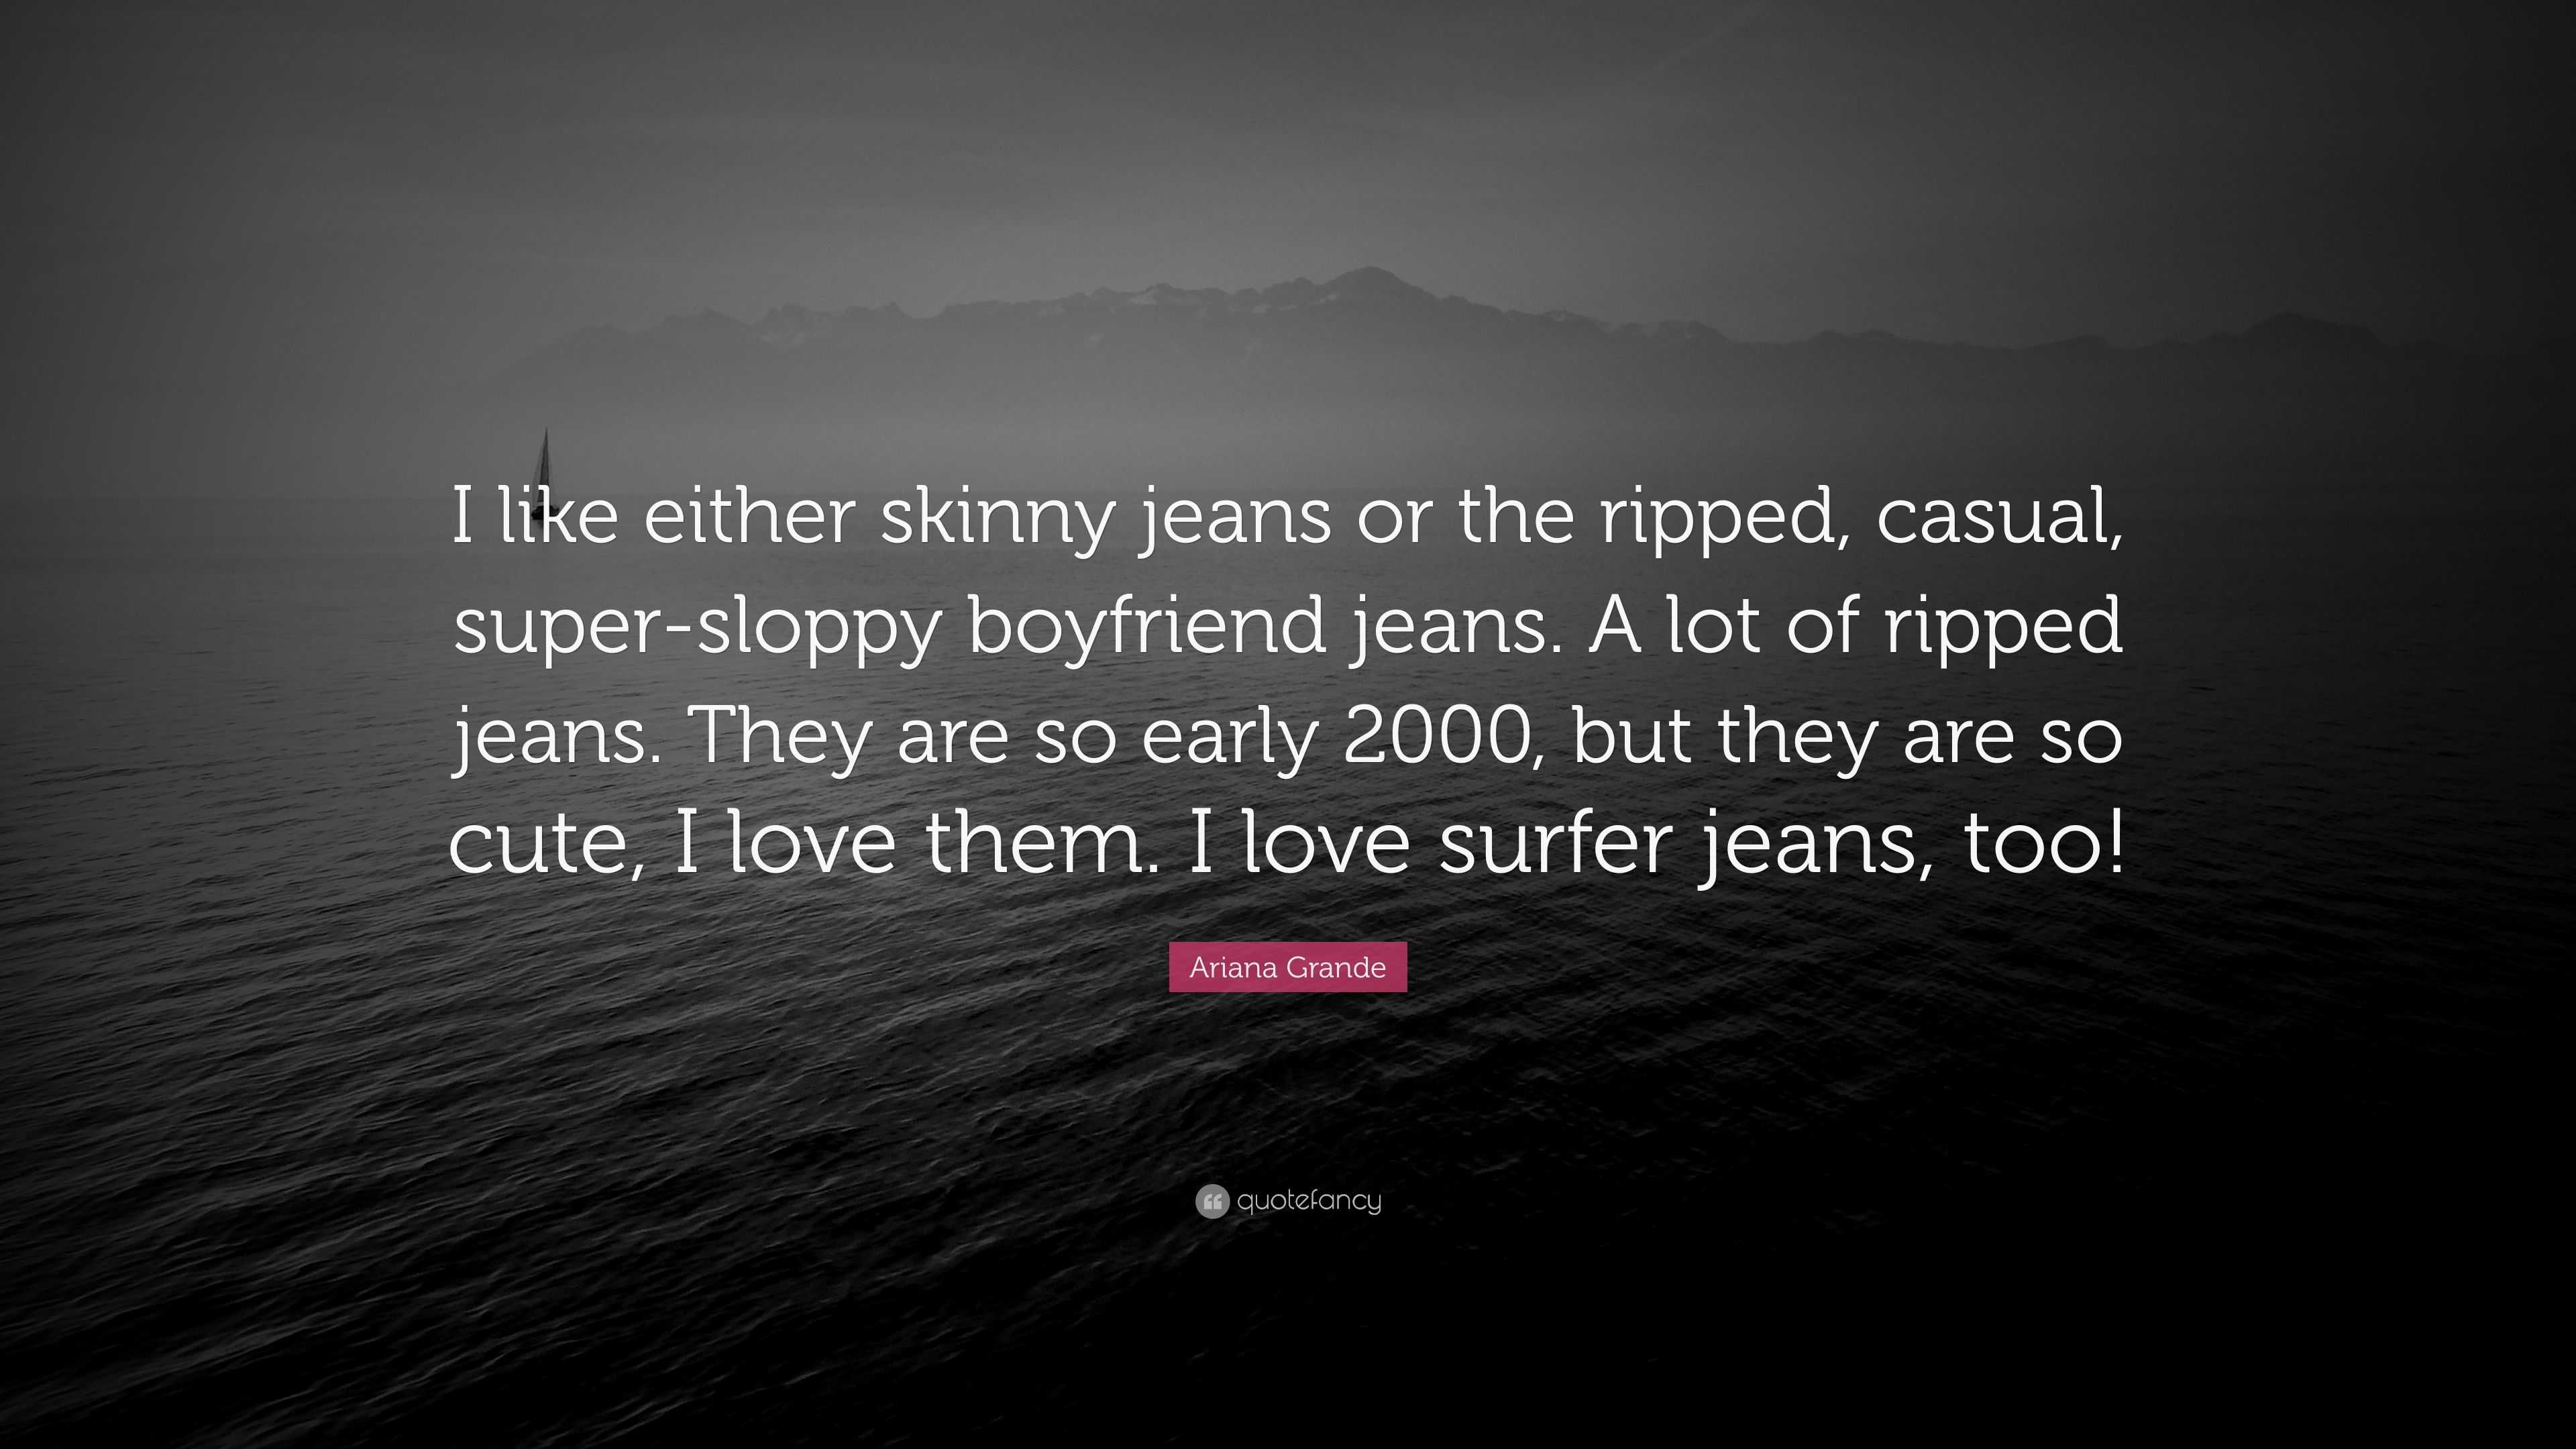 Ariana Grande Quote: “I like either skinny jeans or the ripped, casual ...